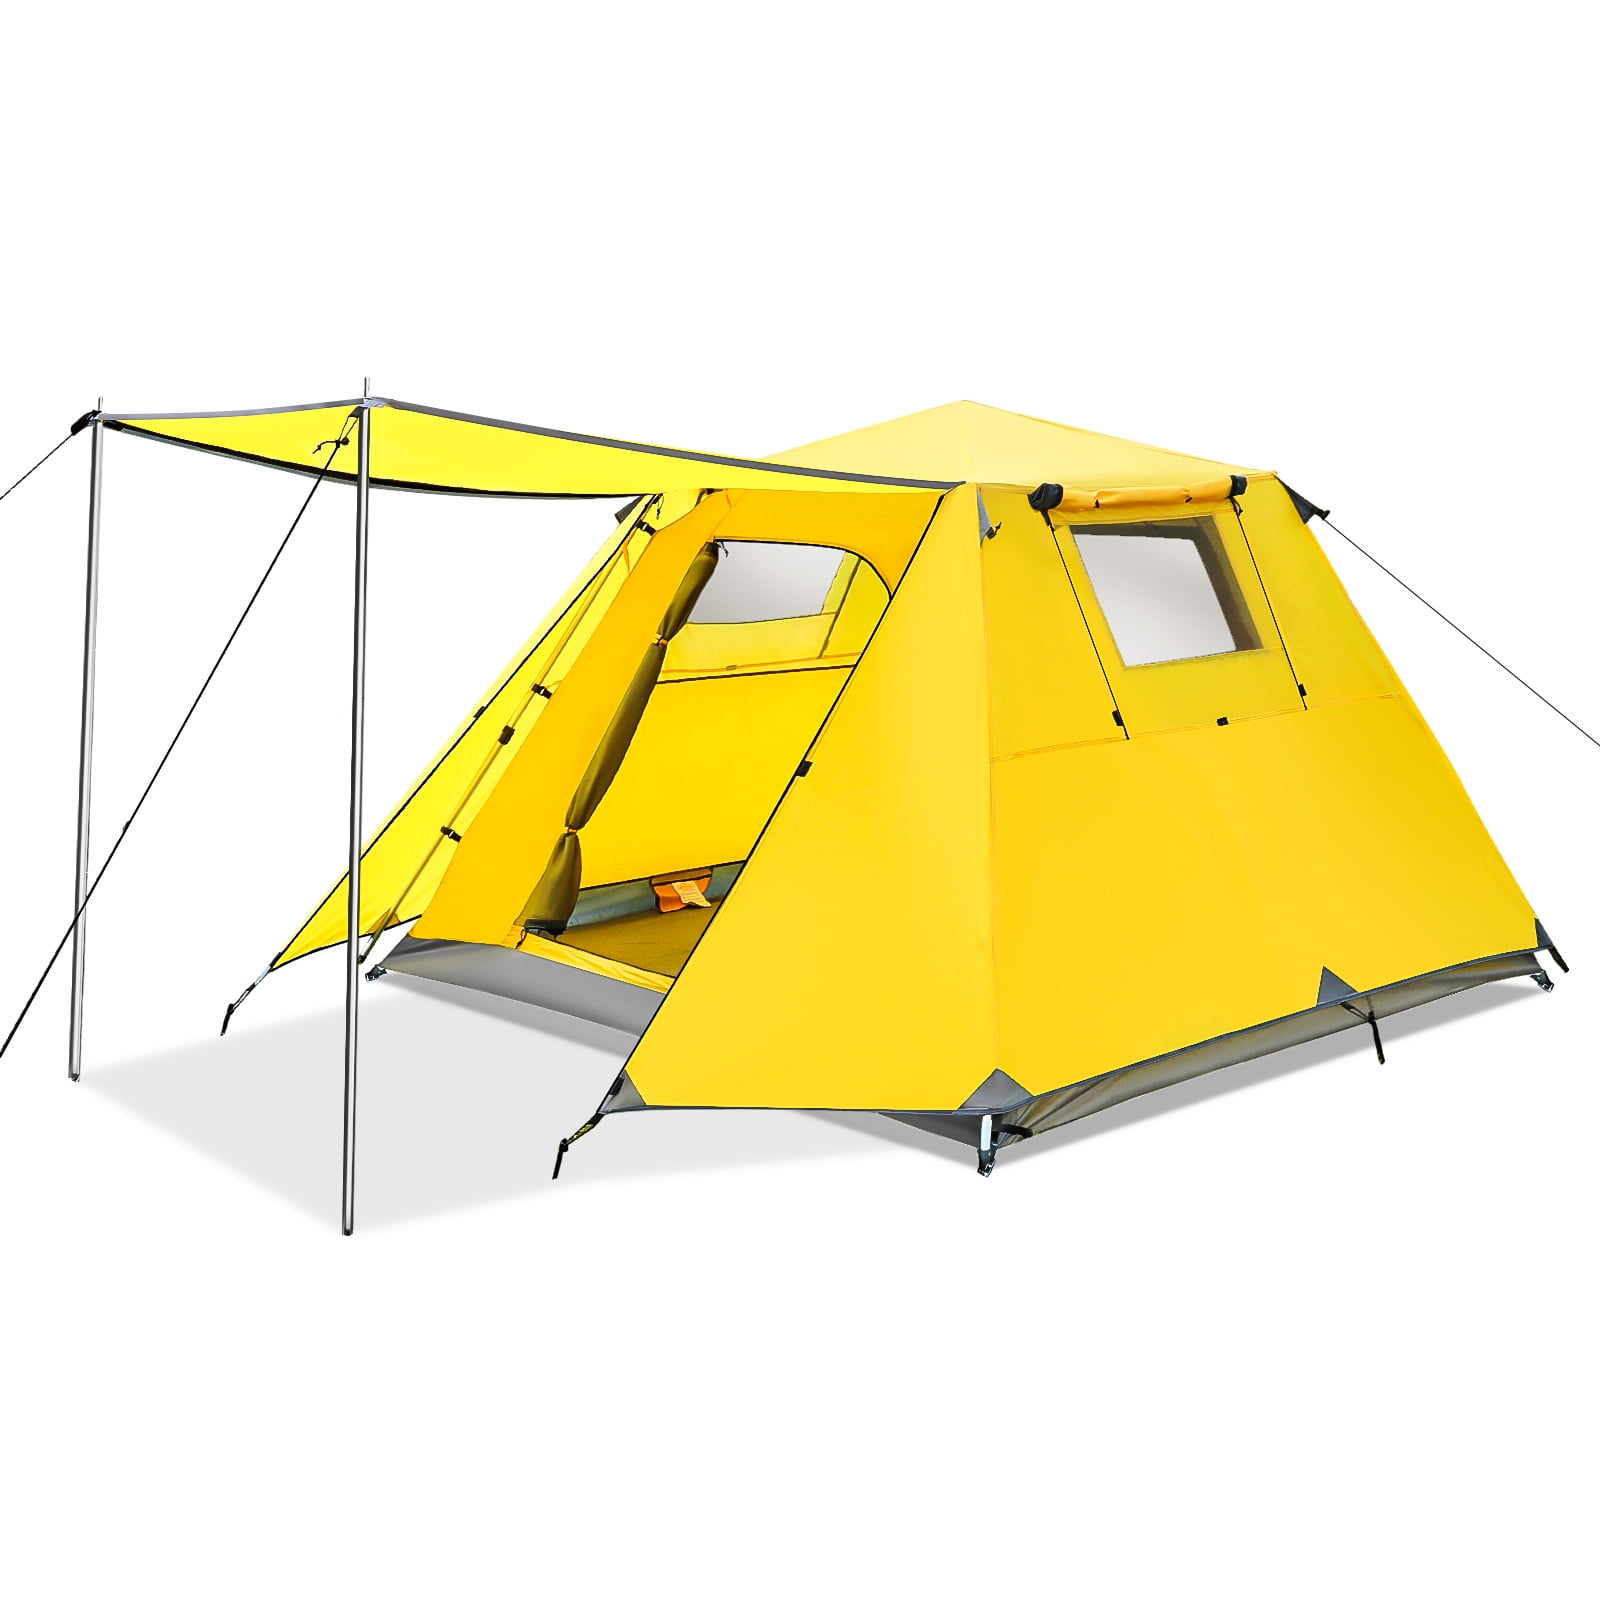 Buy TOOCA 4-Person Camping Tent Online | Ubuy South Africa